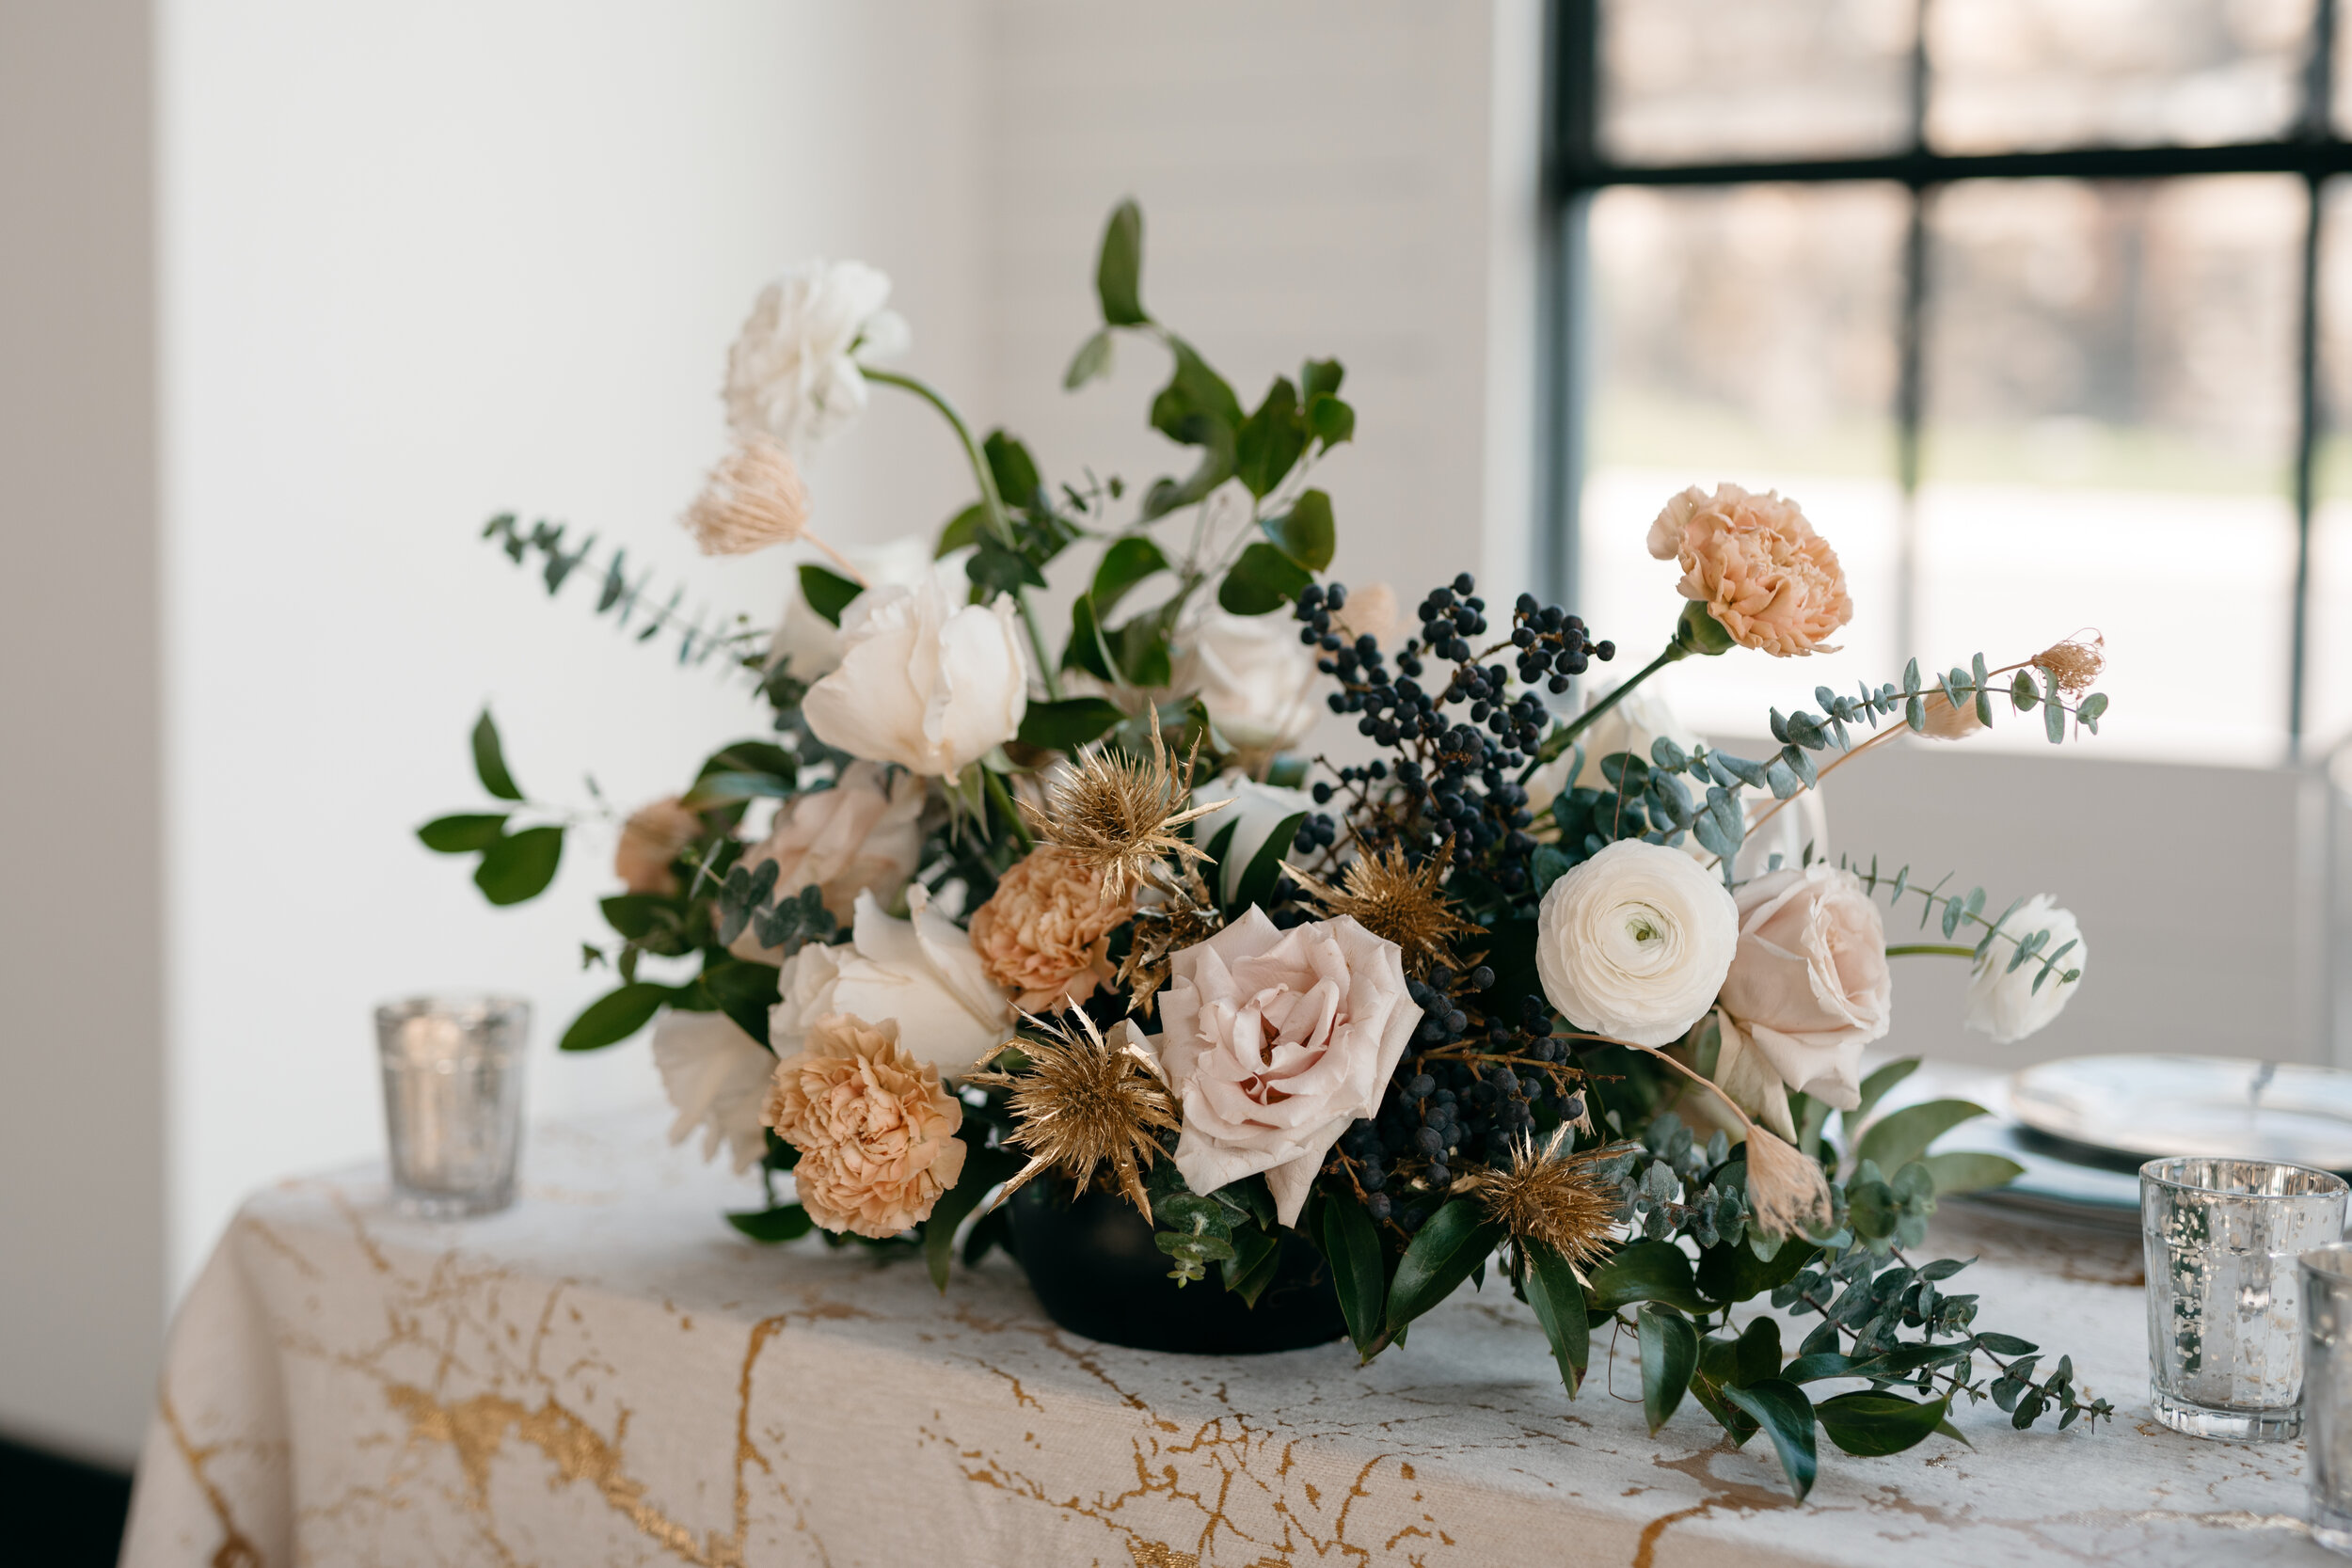 Winter inspiration centerpiece featuring white roses, touches of gold, baby eucalyptus and lush greenery. Nashville wedding florist Rosemary & Finch at OZARI.